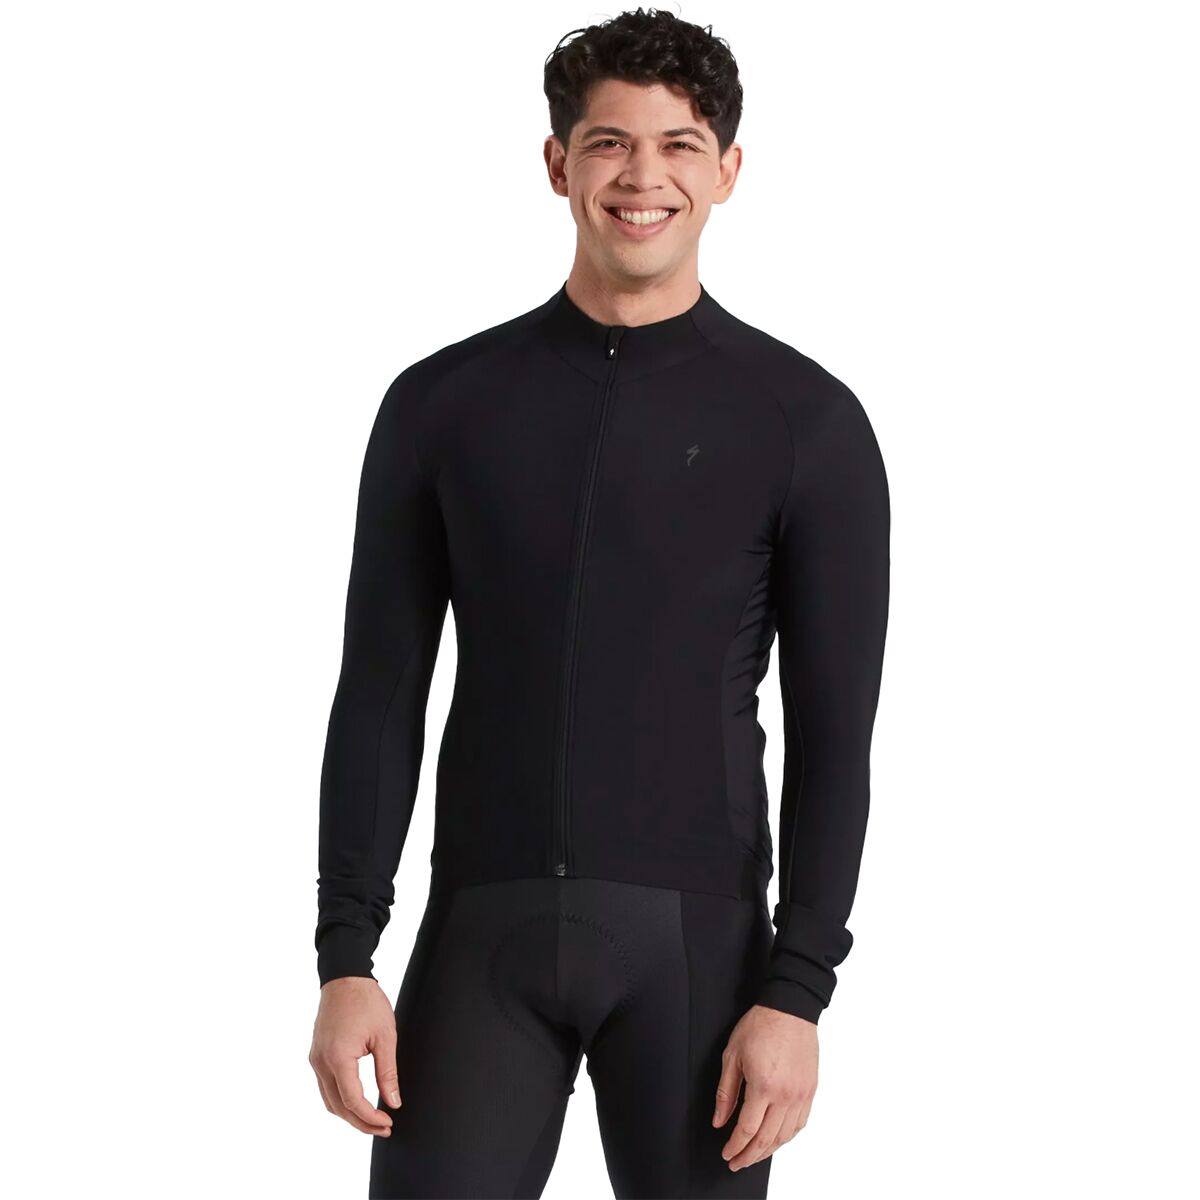 Specialized SL Expert Thermal Long-Sleeve Jersey - Men's Black, L